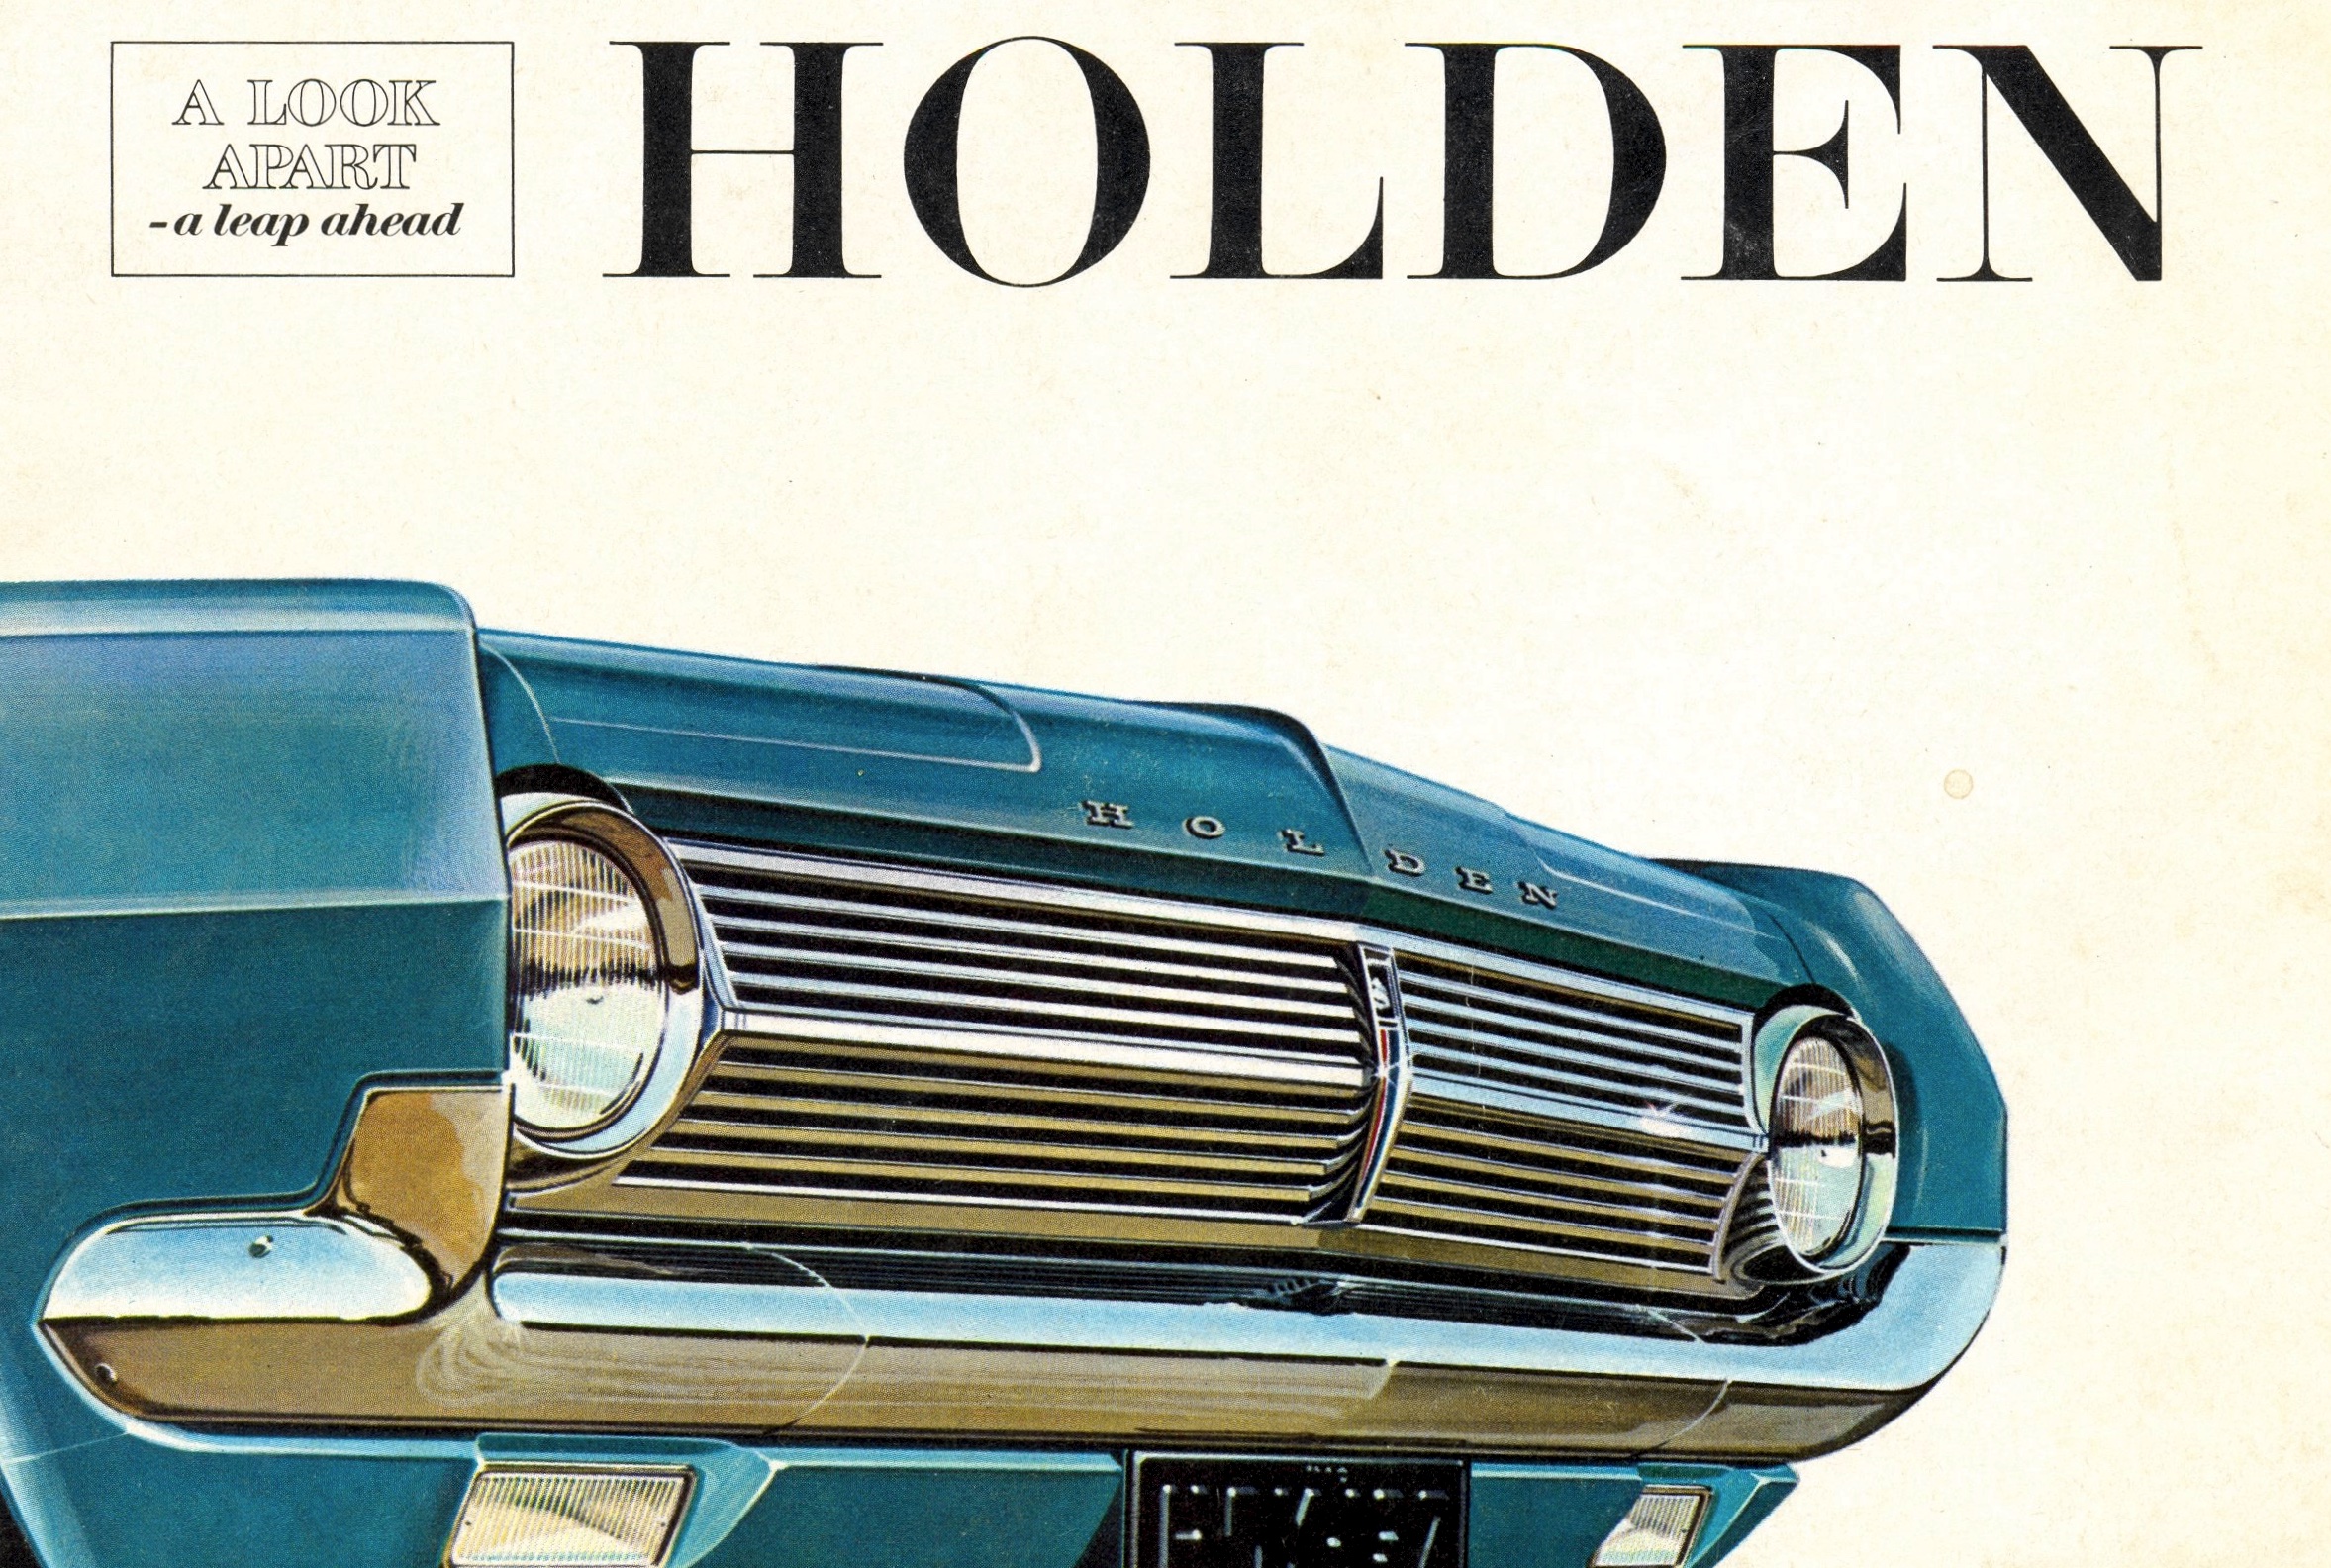 1965 Holden HD Brochure Page 6